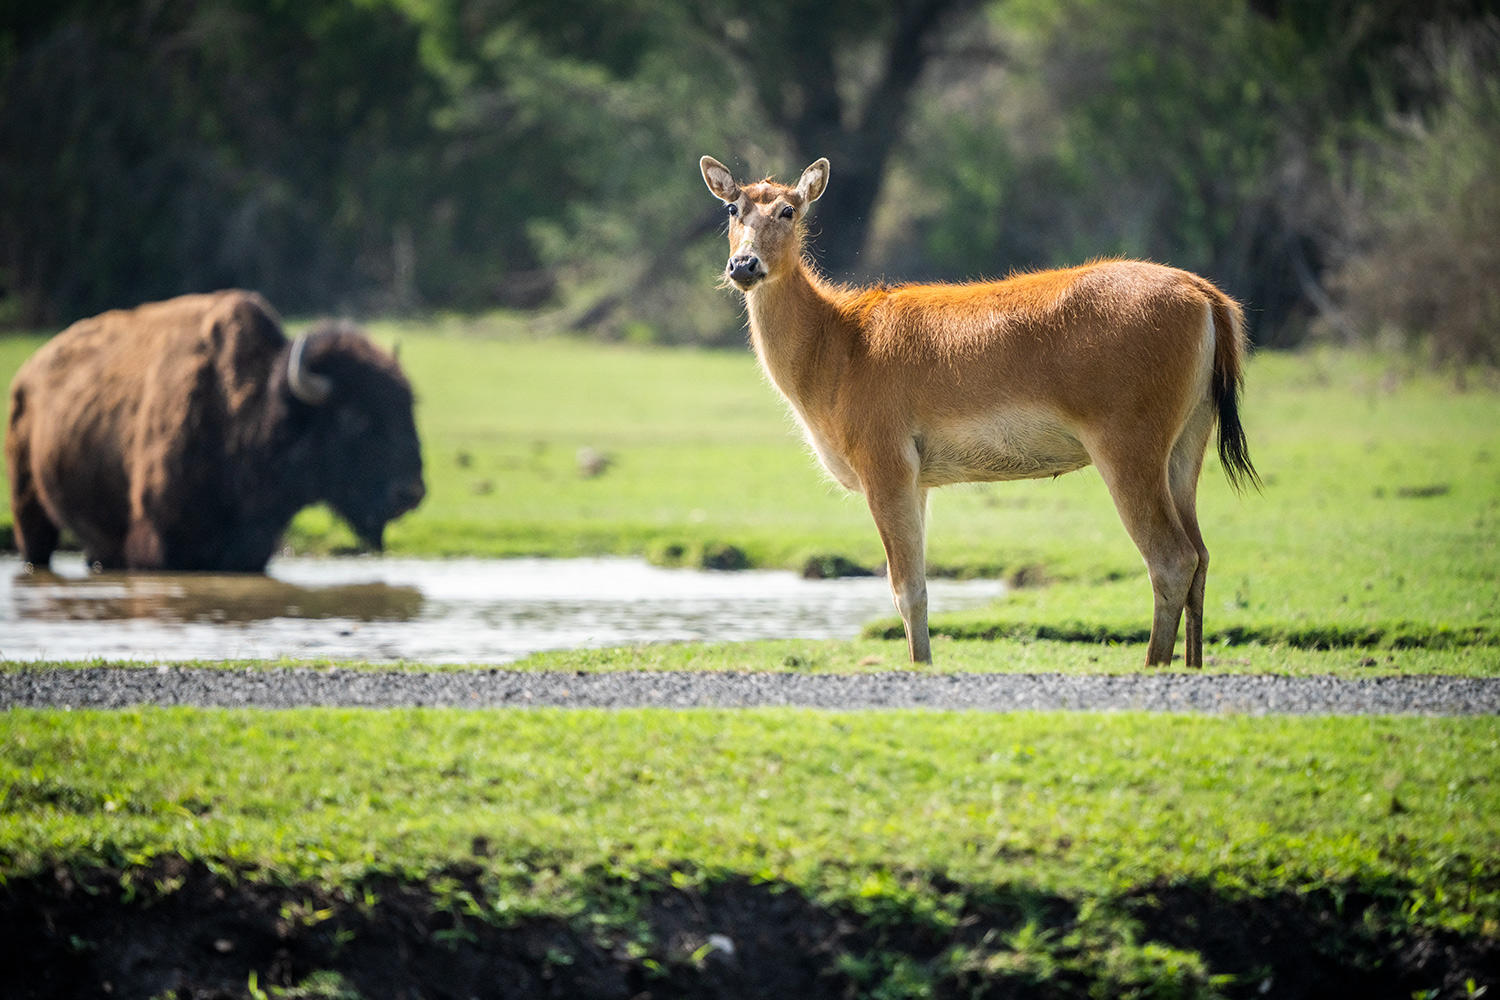 A Chinese deer shares a stock tank with an American bison at Salt Creek Ranch.